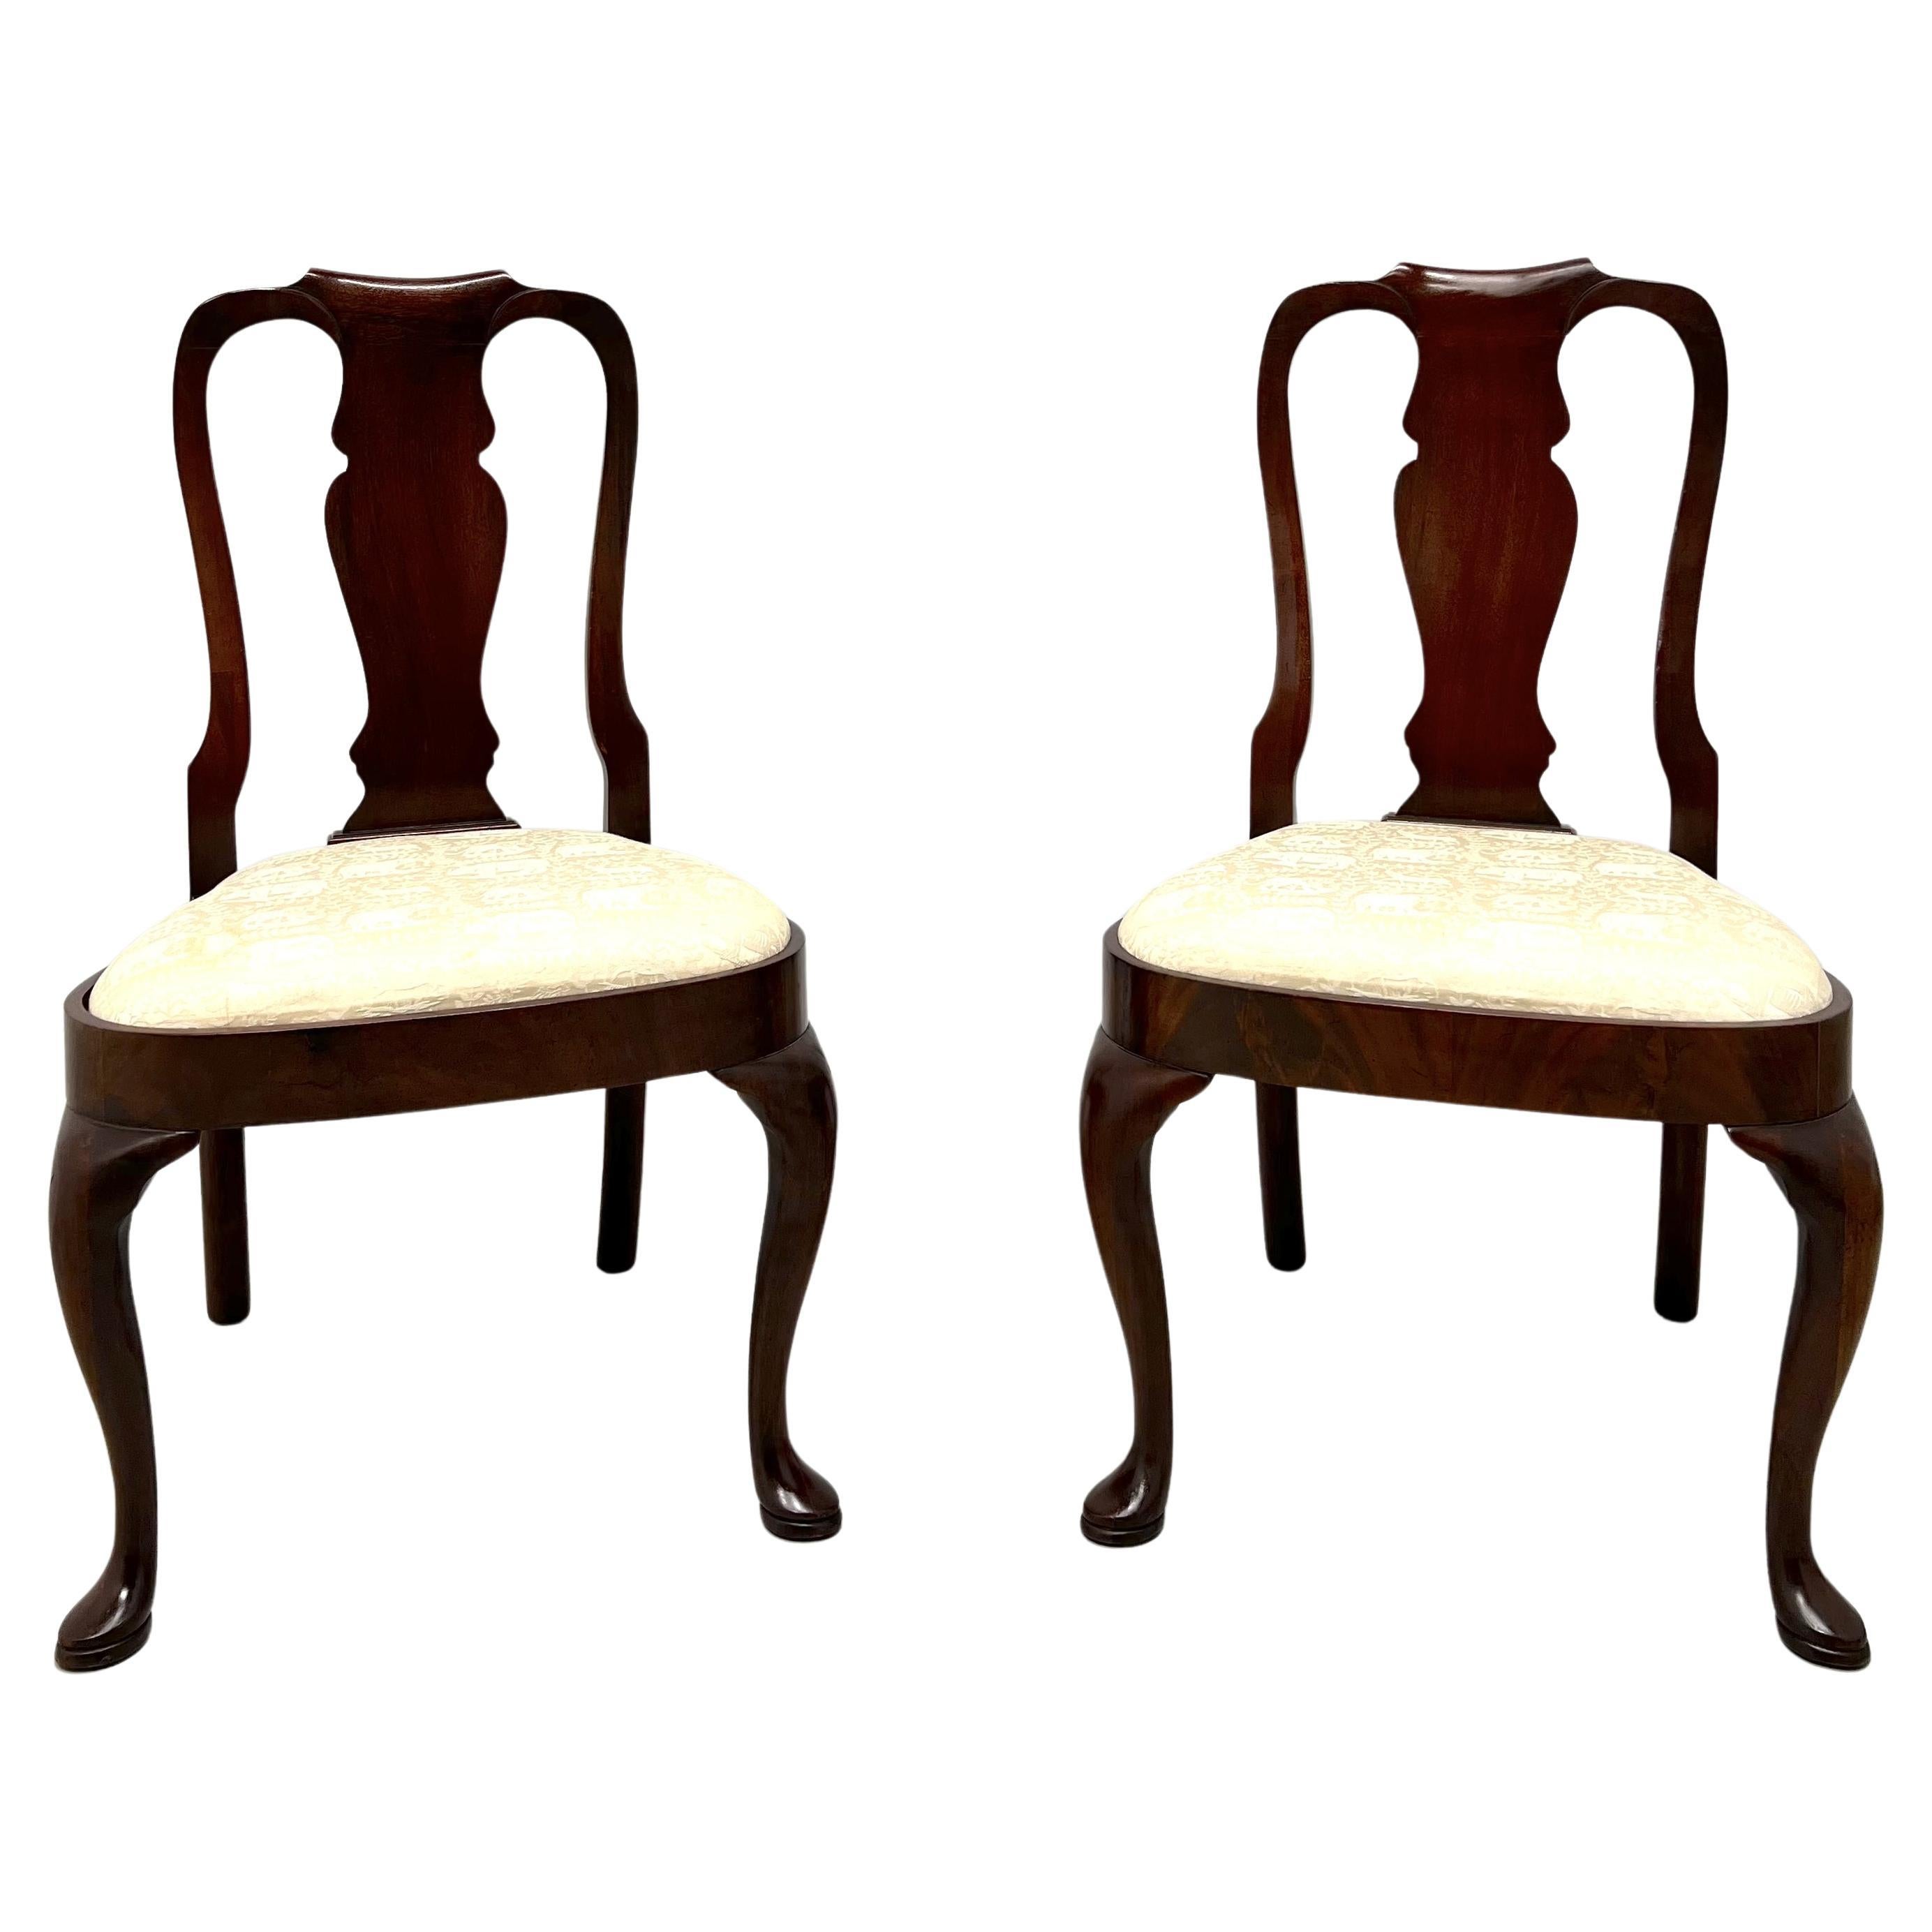 HICKORY CHAIR Mahogany Queen Anne Dining Side Chairs - Pair For Sale